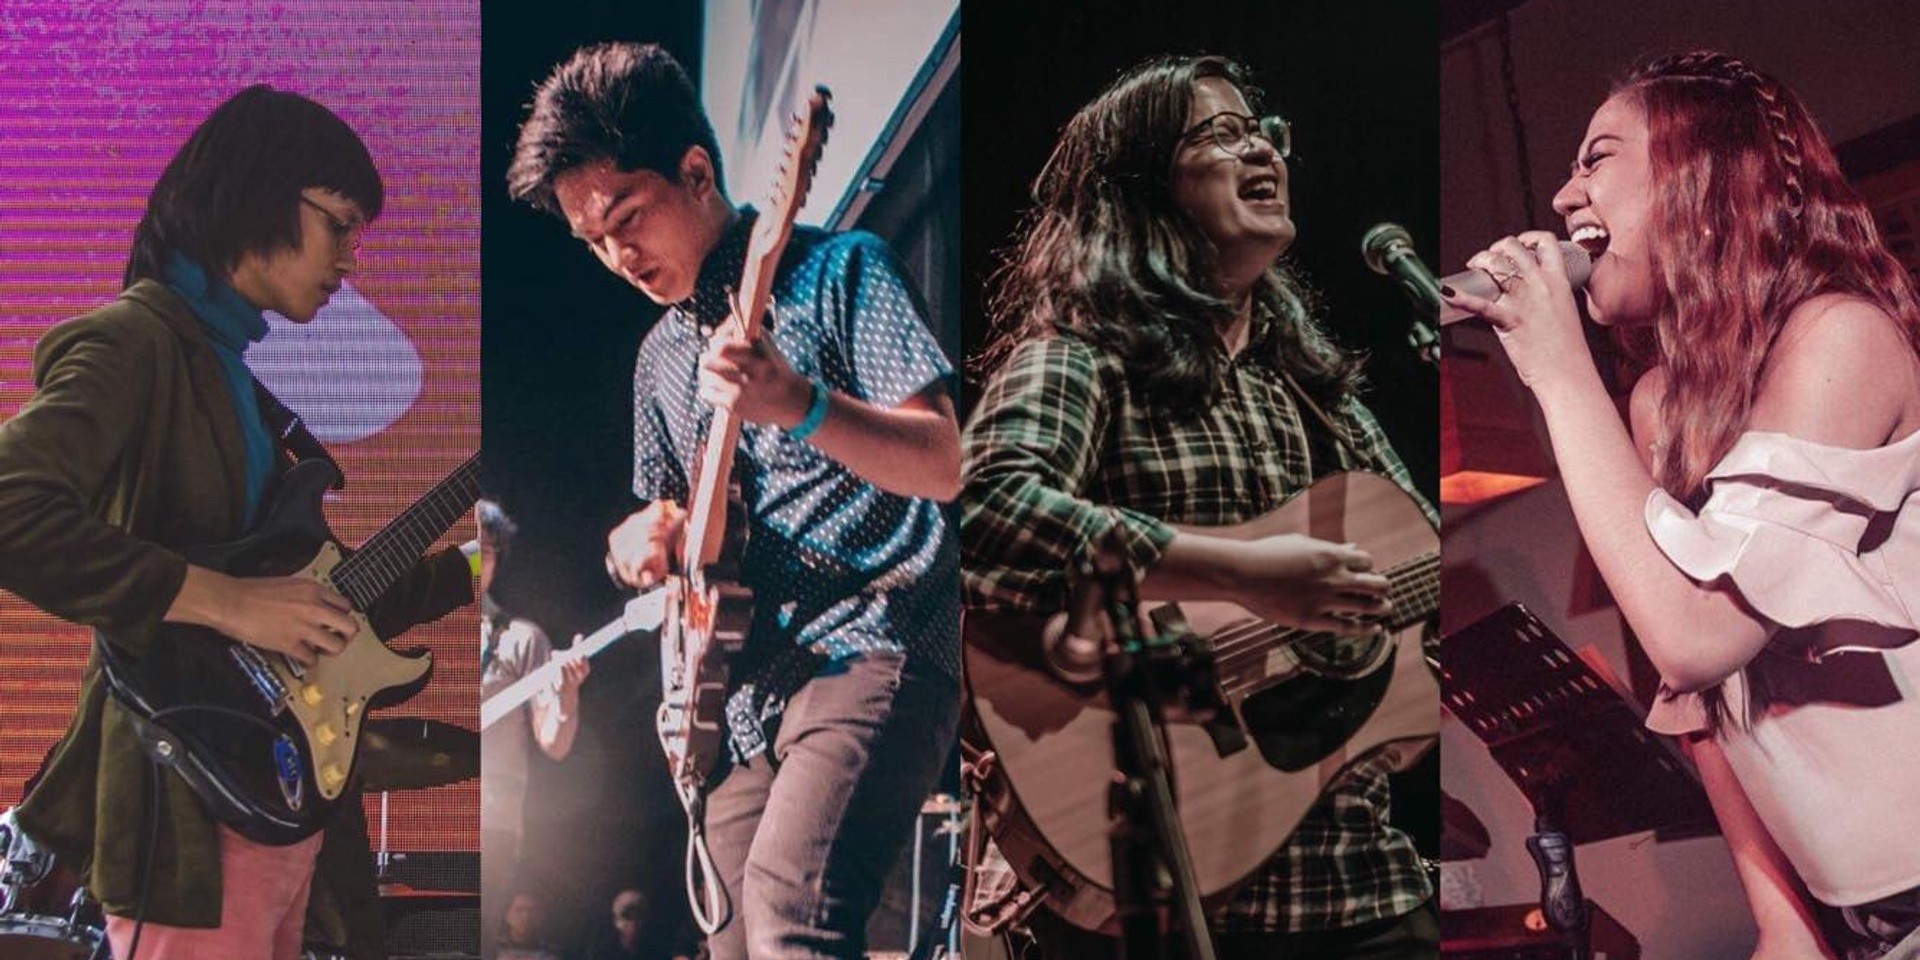 Tom's Story, Ben&Ben, IV of Spades, and more win at the Wish Music Awards